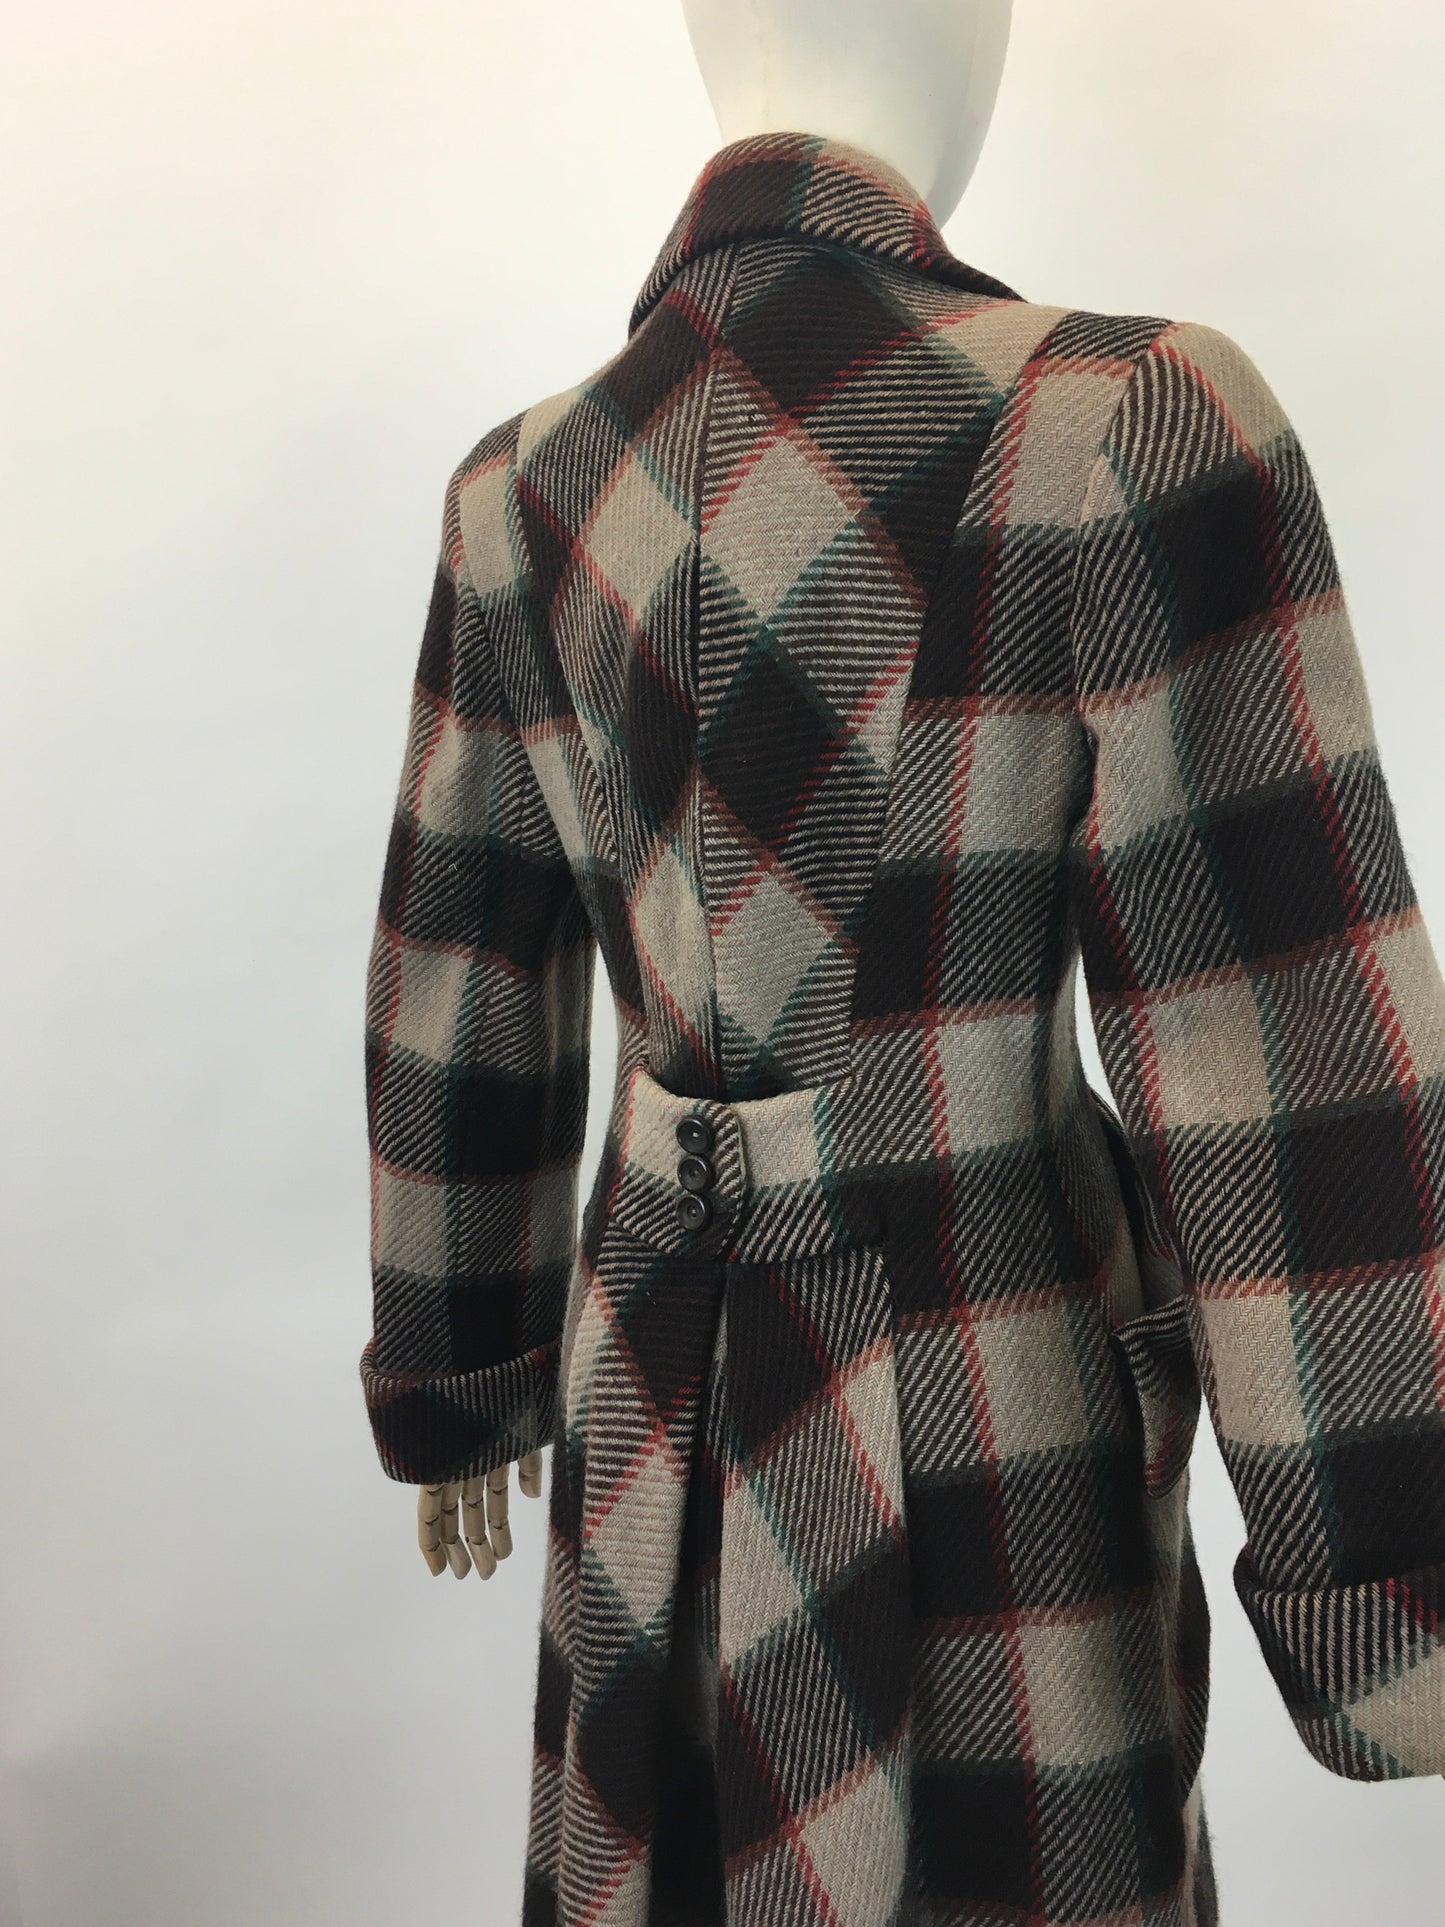 Original 1940's SENSATIONAL CC41 Utility Coat - In A Plaid Colourway of Rust, Warm Brown, Emerald Green and Cinnamon